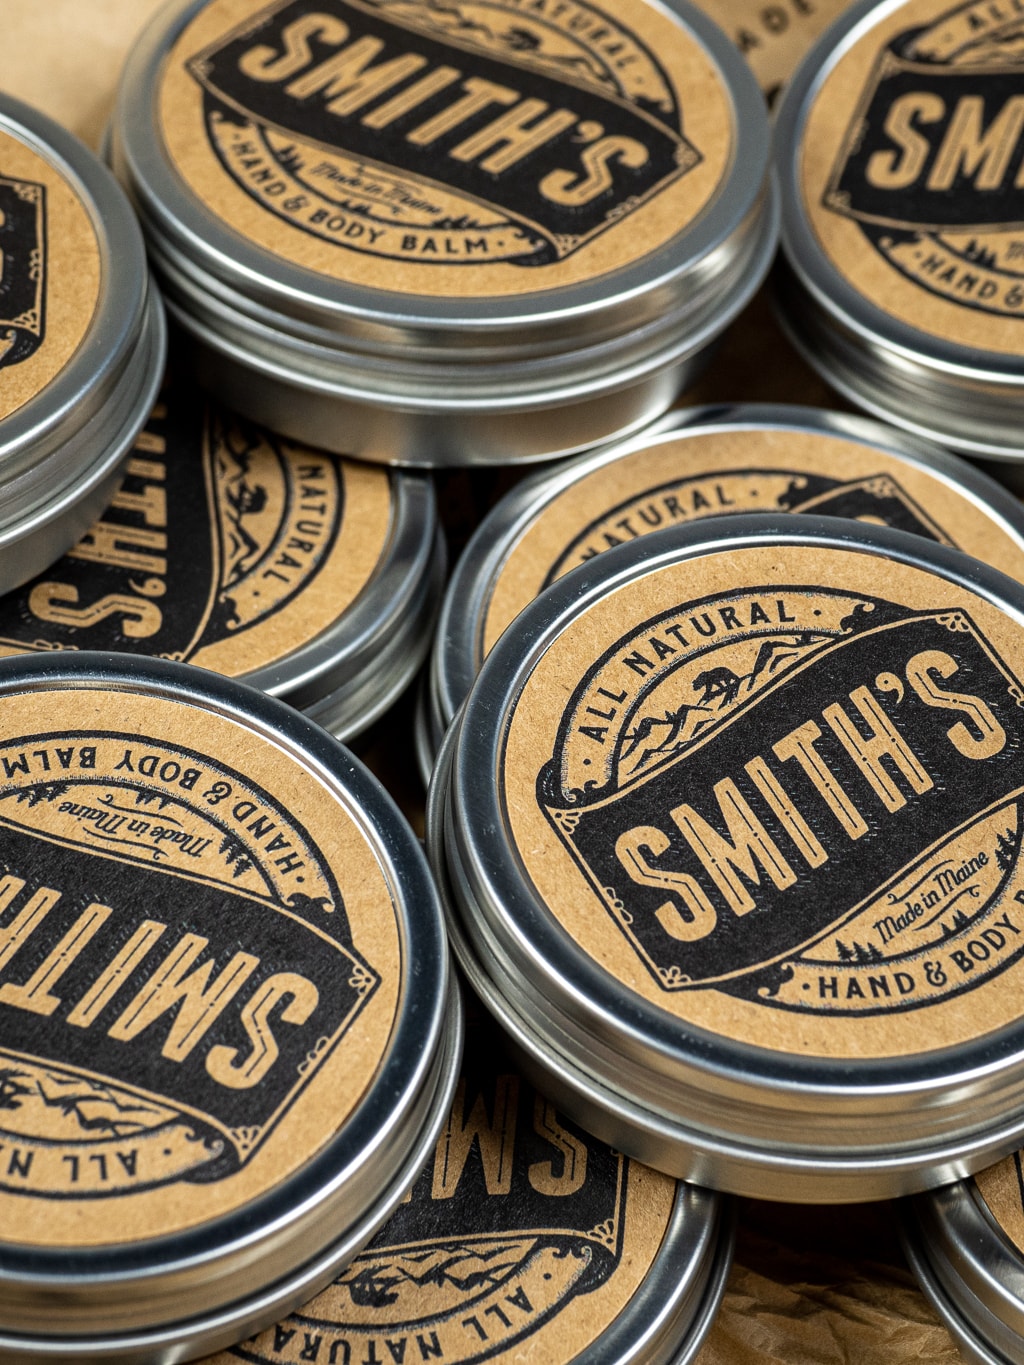 Smith s Hand and Body balm self care